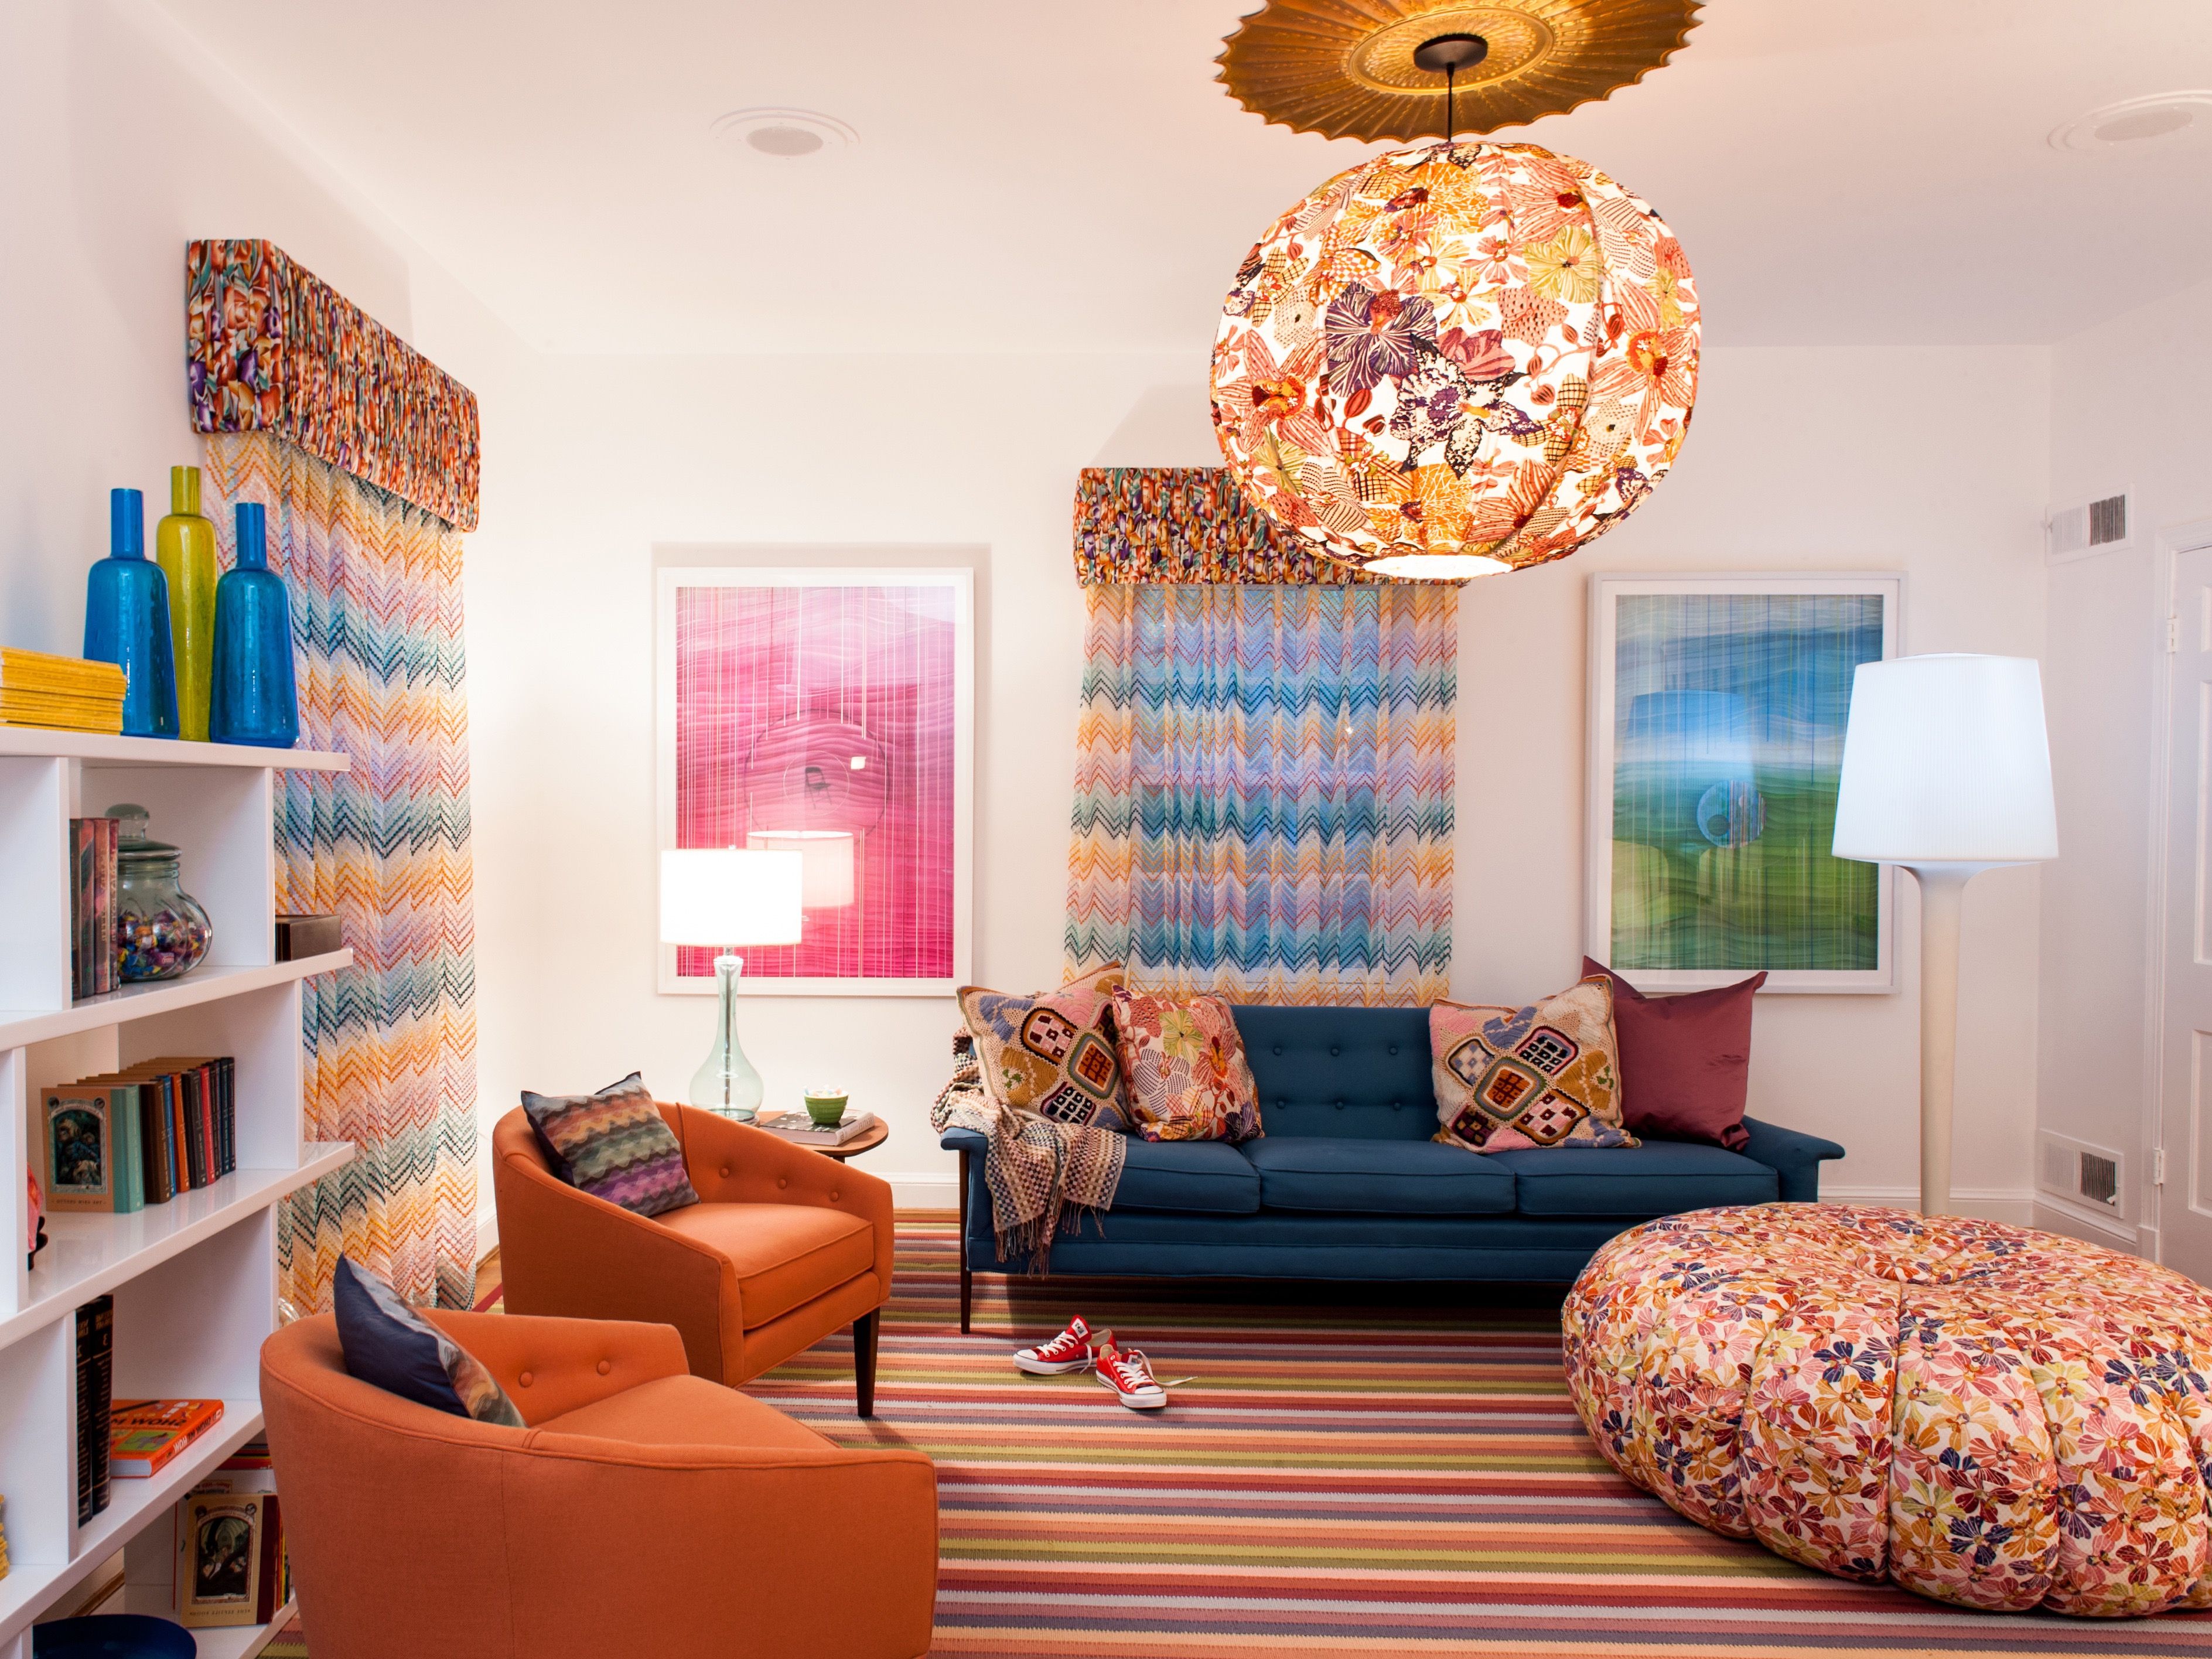 Amazing Decor For Kids Playroom With Mod Furniture, Striped Rug, And Funky Chandelier (View 16 of 30)